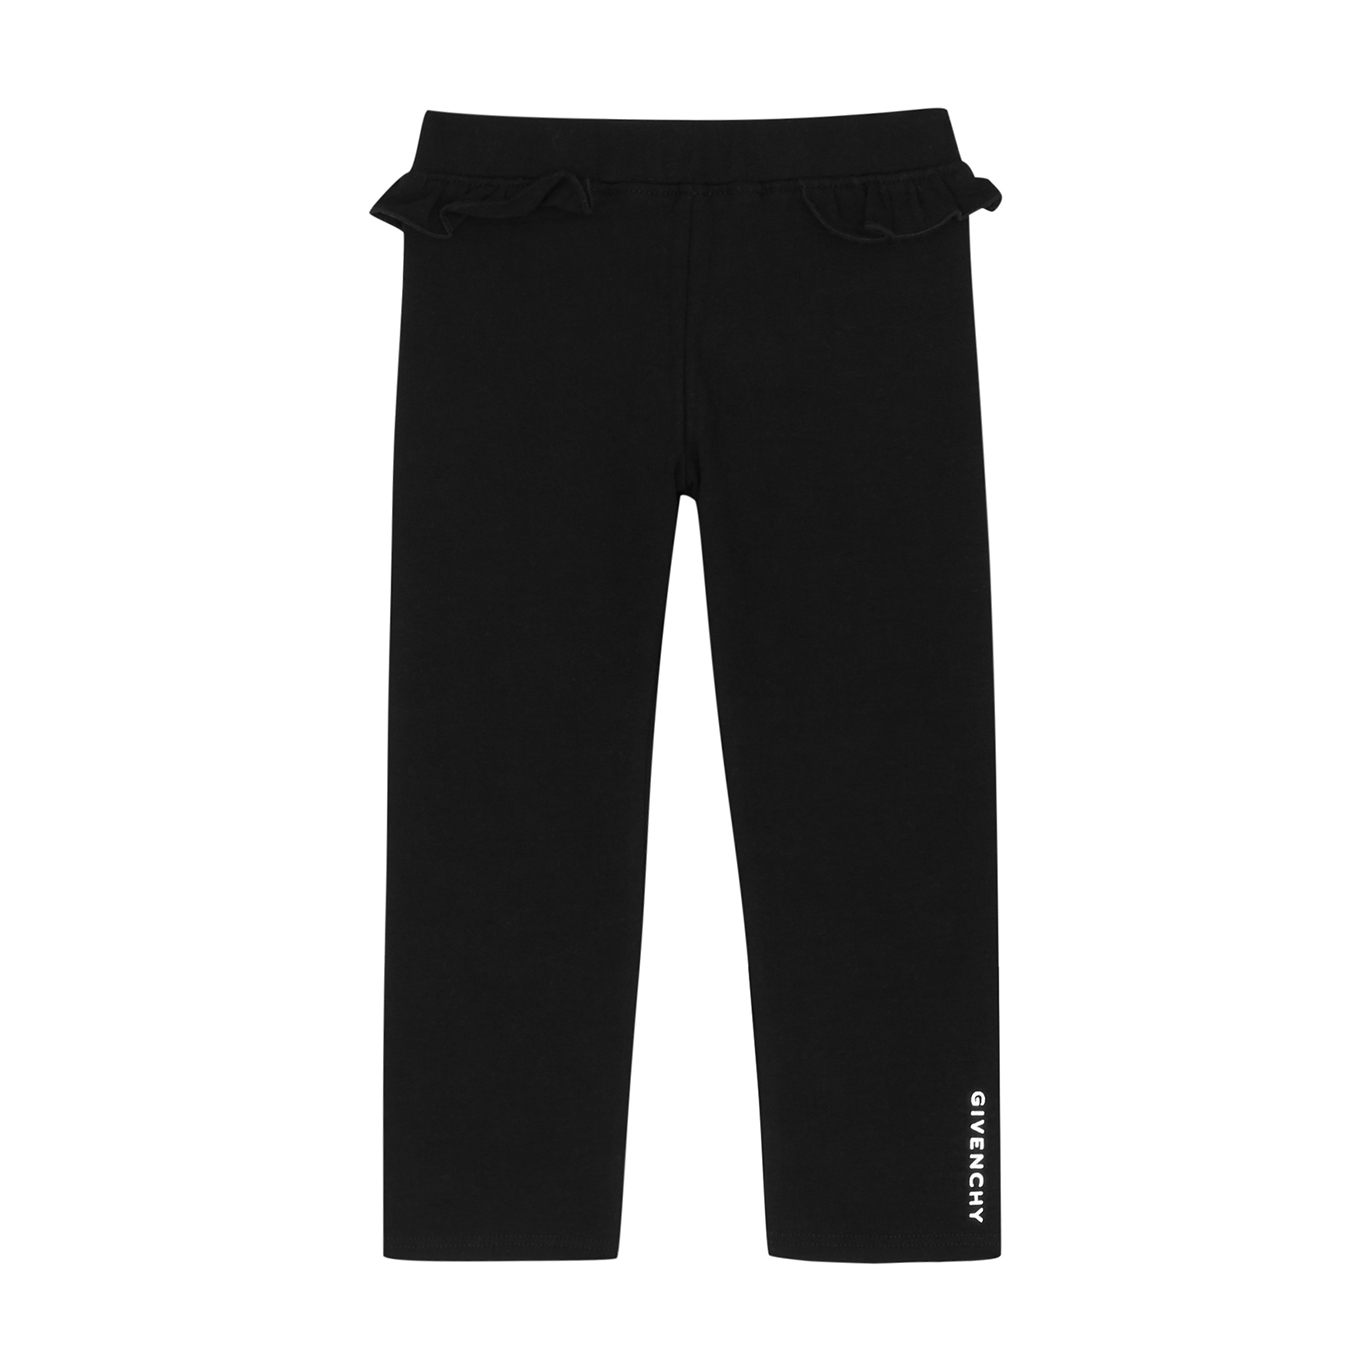 Givenchy Kids Black Ruffled Stretch-cotton Leggings (2-3 Years)